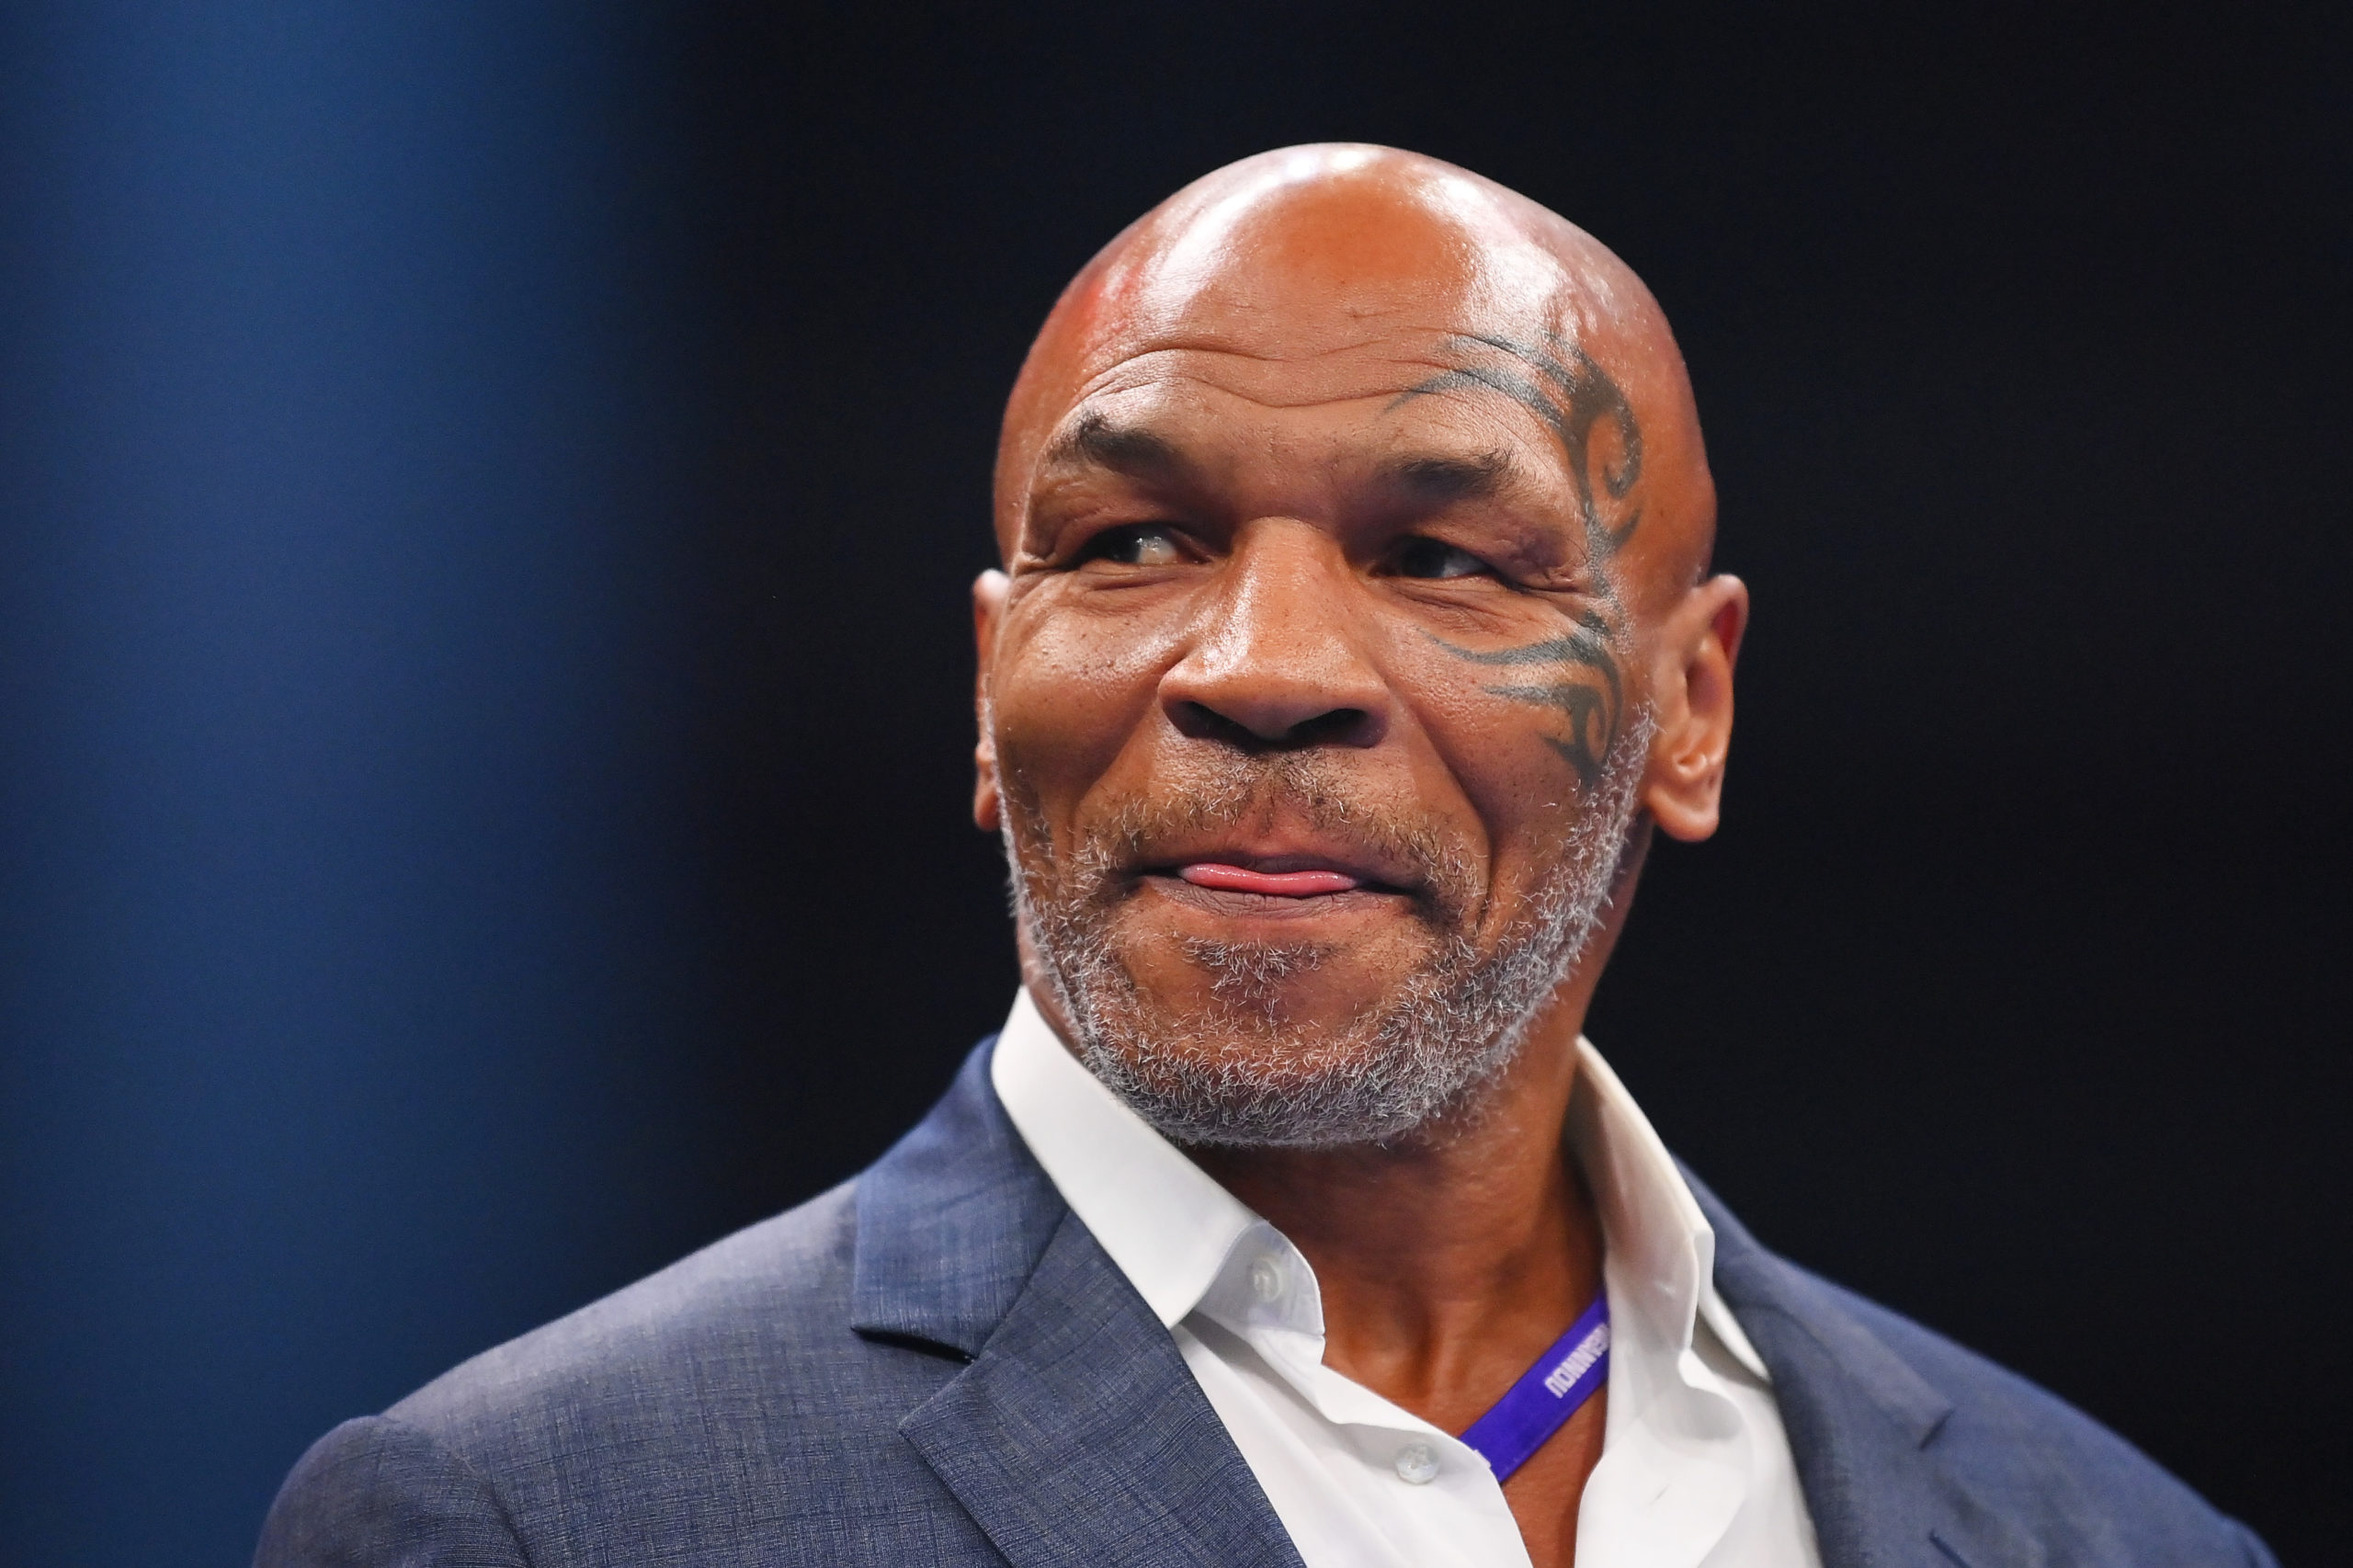 RIYADH, SAUDI ARABIA - OCTOBER 28: Mike Tyson looks on prior to the Heavyweight fight between Tyson Fury and Francis Ngannou at Boulevard Hall on October 28, 2023 in Riyadh, Saudi Arabia. (Photo by Justin Setterfield/Getty Images)